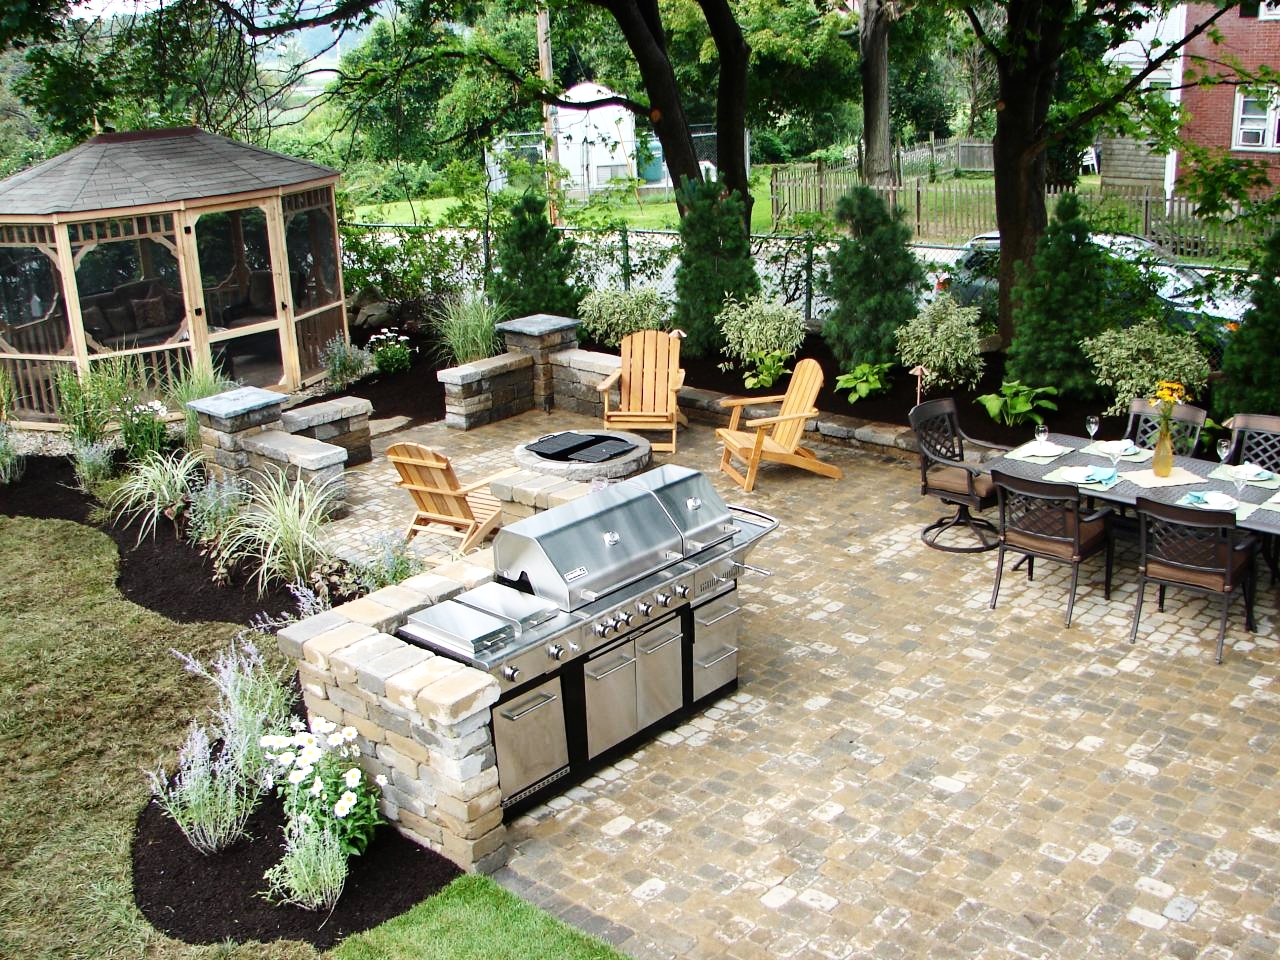 london-ontario-built-in-barbecue-bbq-grill-backyard-stone-landscaper-06.jpeg